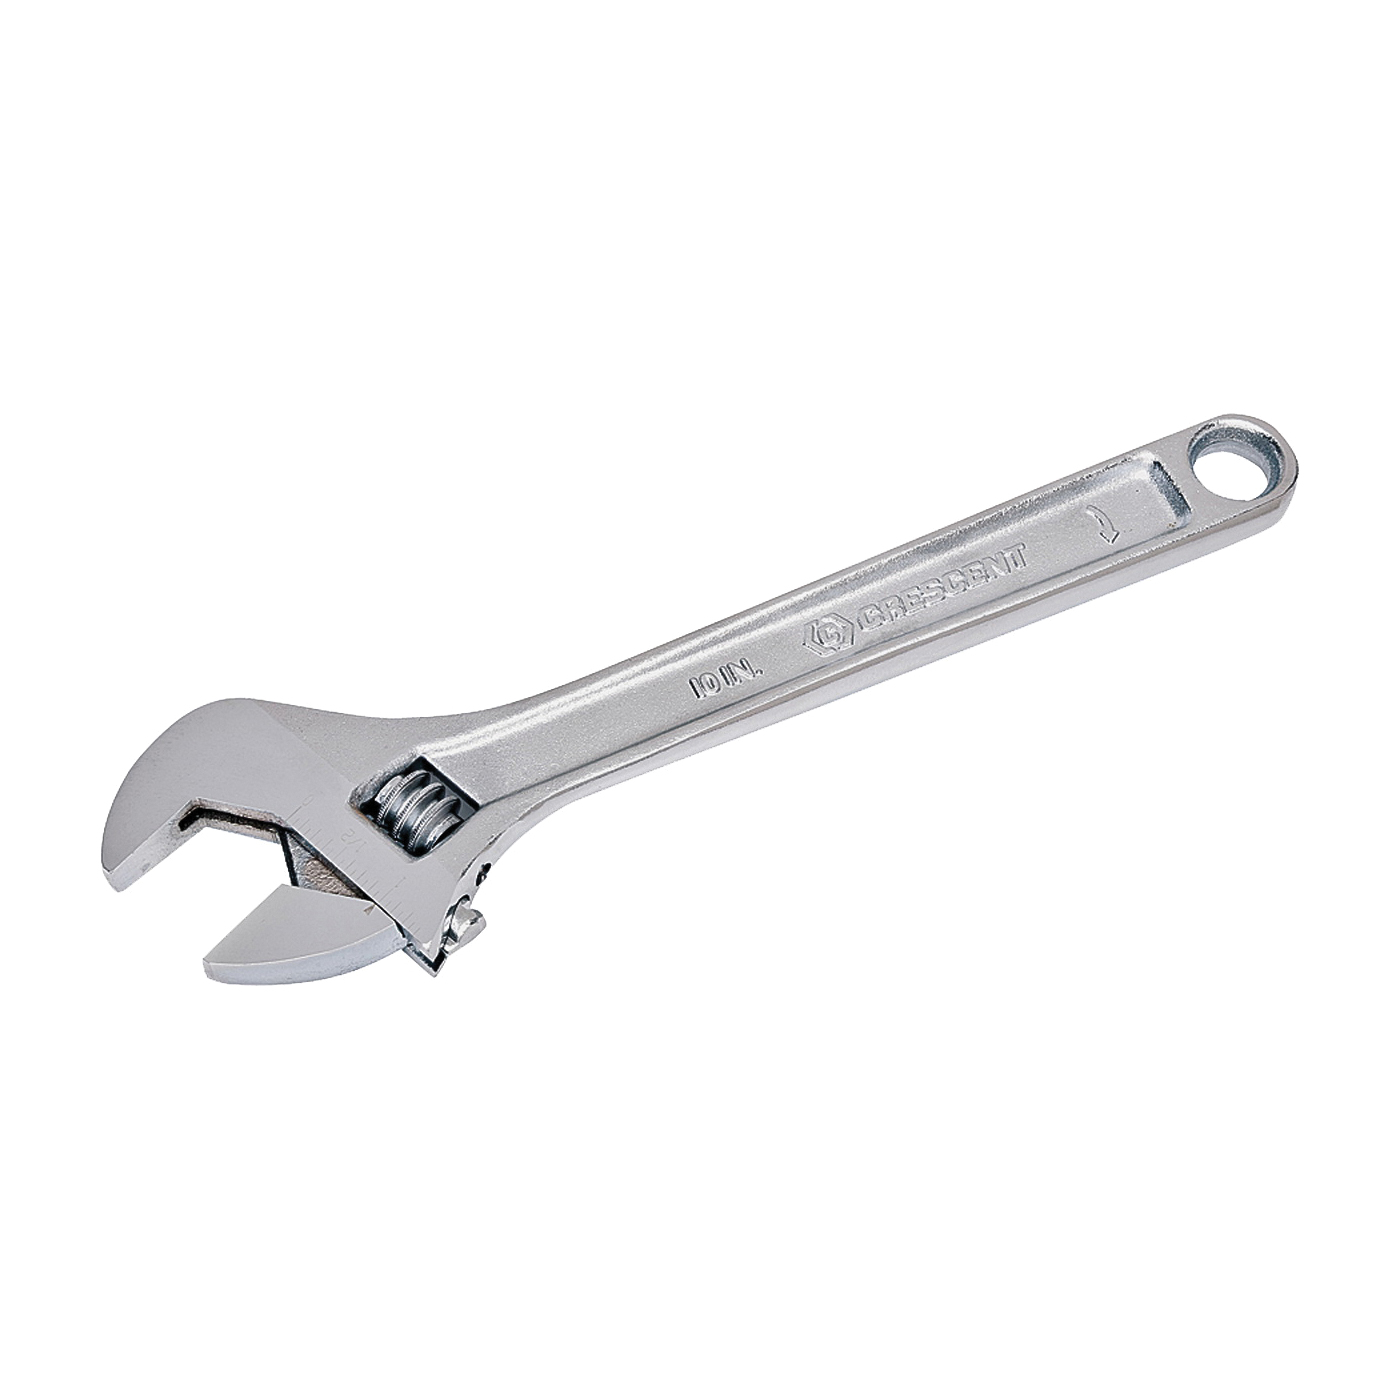 AC210VS Adjustable Wrench, 10 in OAL, 1.313 in Jaw, Steel, Chrome, Non-Cushion Grip Handle